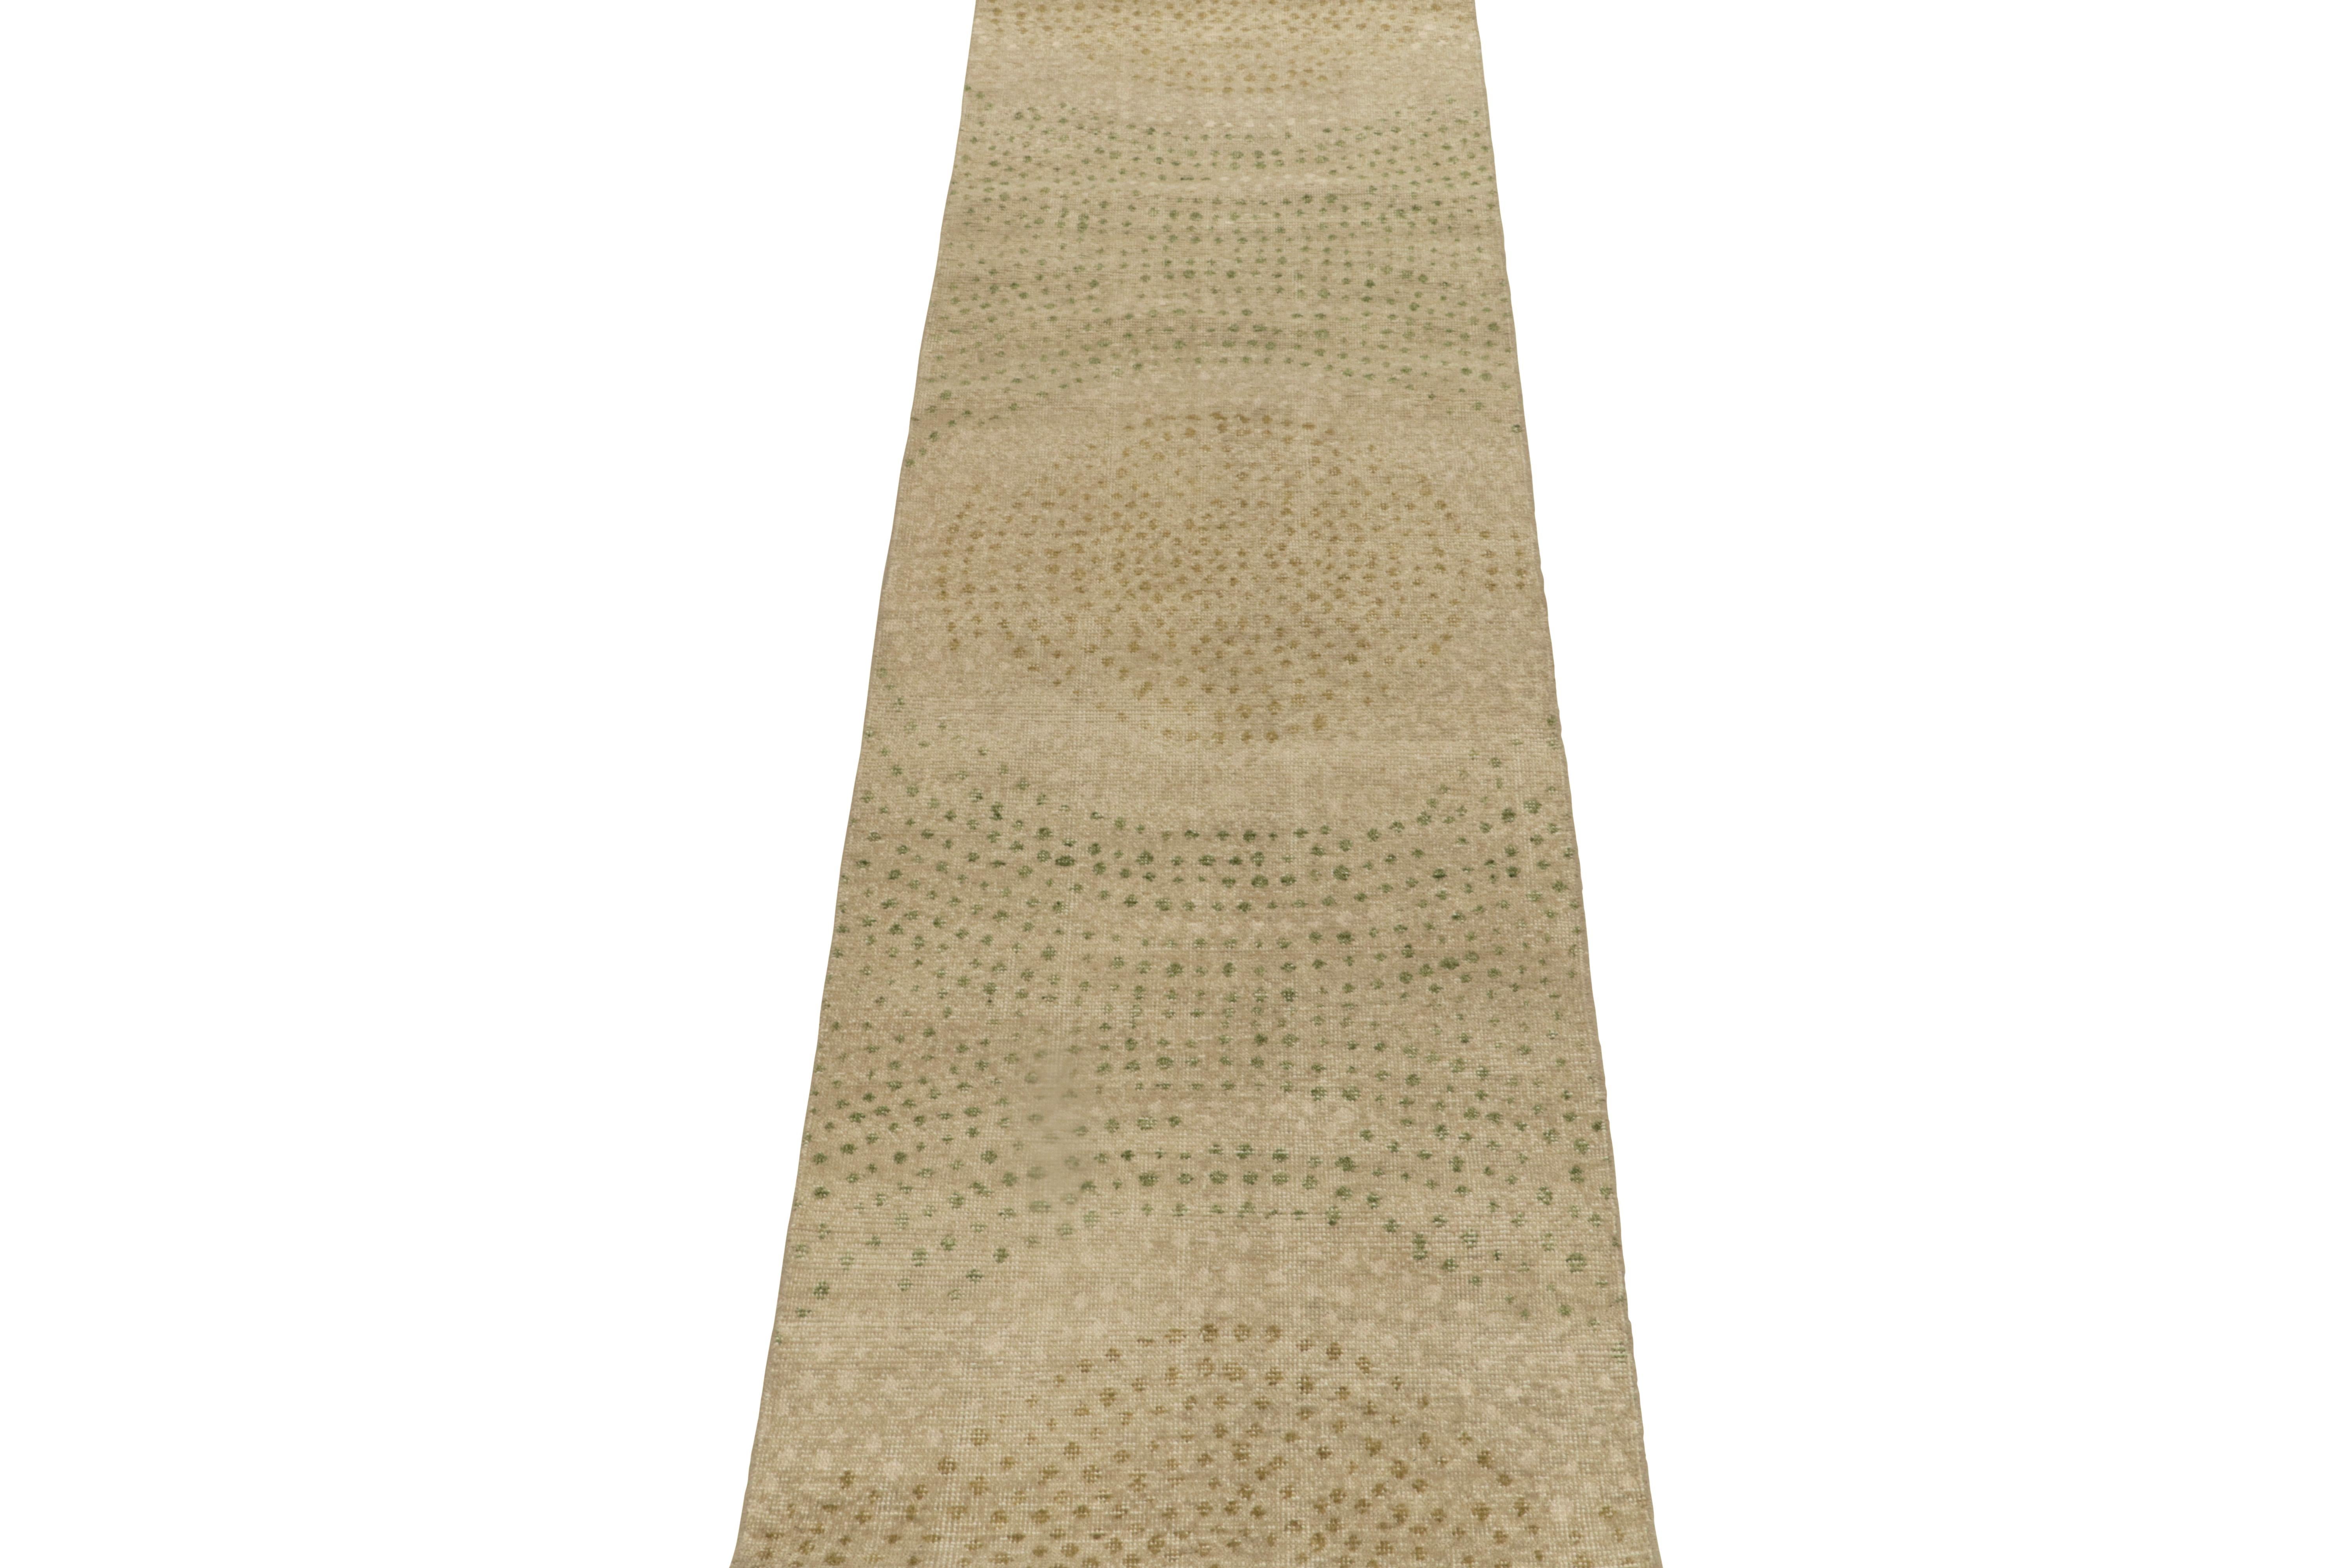 A 3x10 hand-knotted wool runner from the modern inspirations of Rug & Kilim encyclopedic Homage Collection.

On the Design: This rug is a bold addition to our experiment with dots patterns, with a more refreshing idea of abstract rugs and